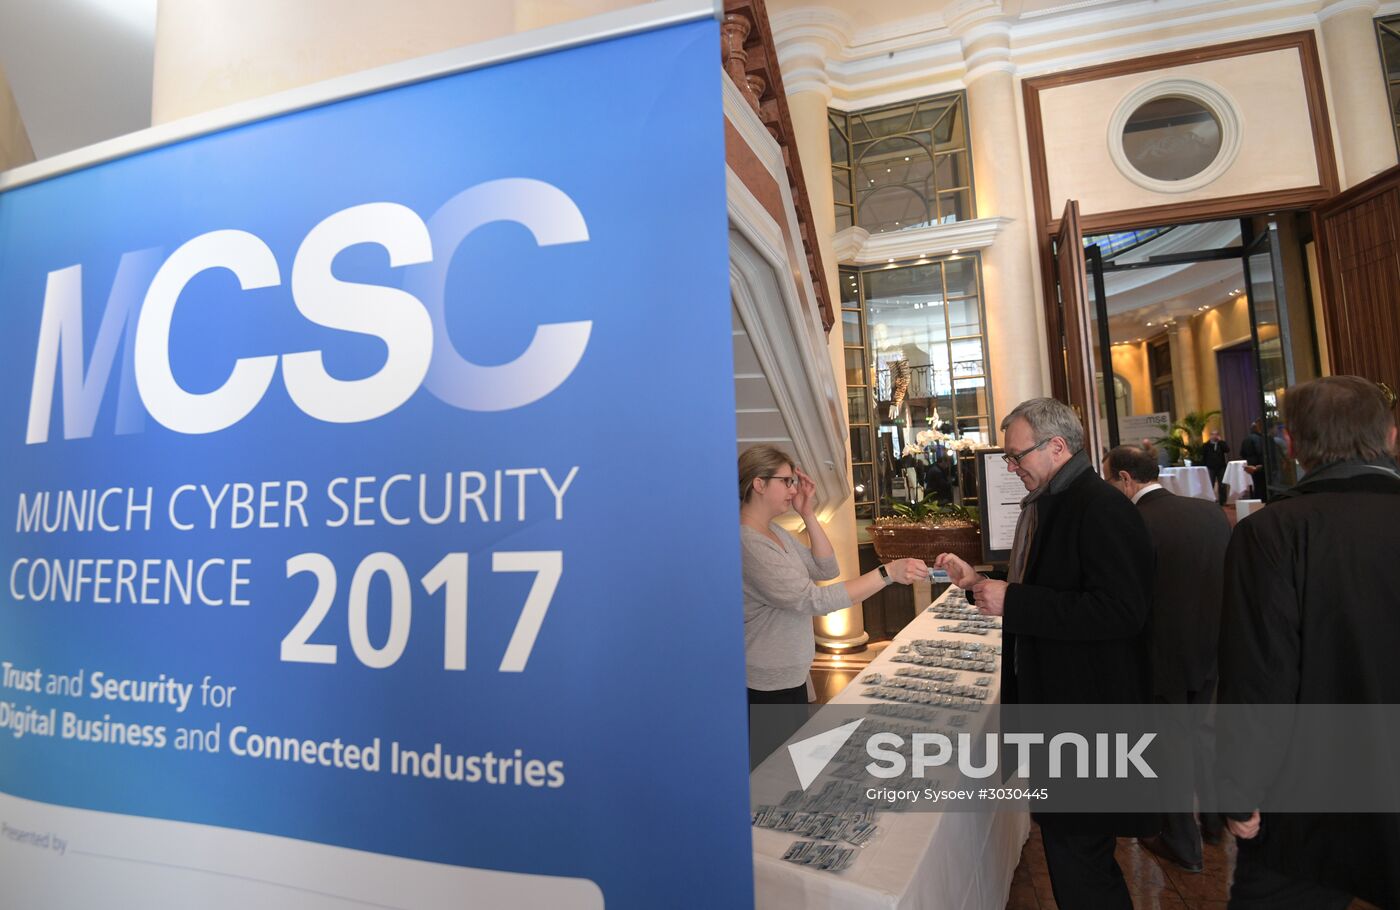 Preparations for Munich Security Conference